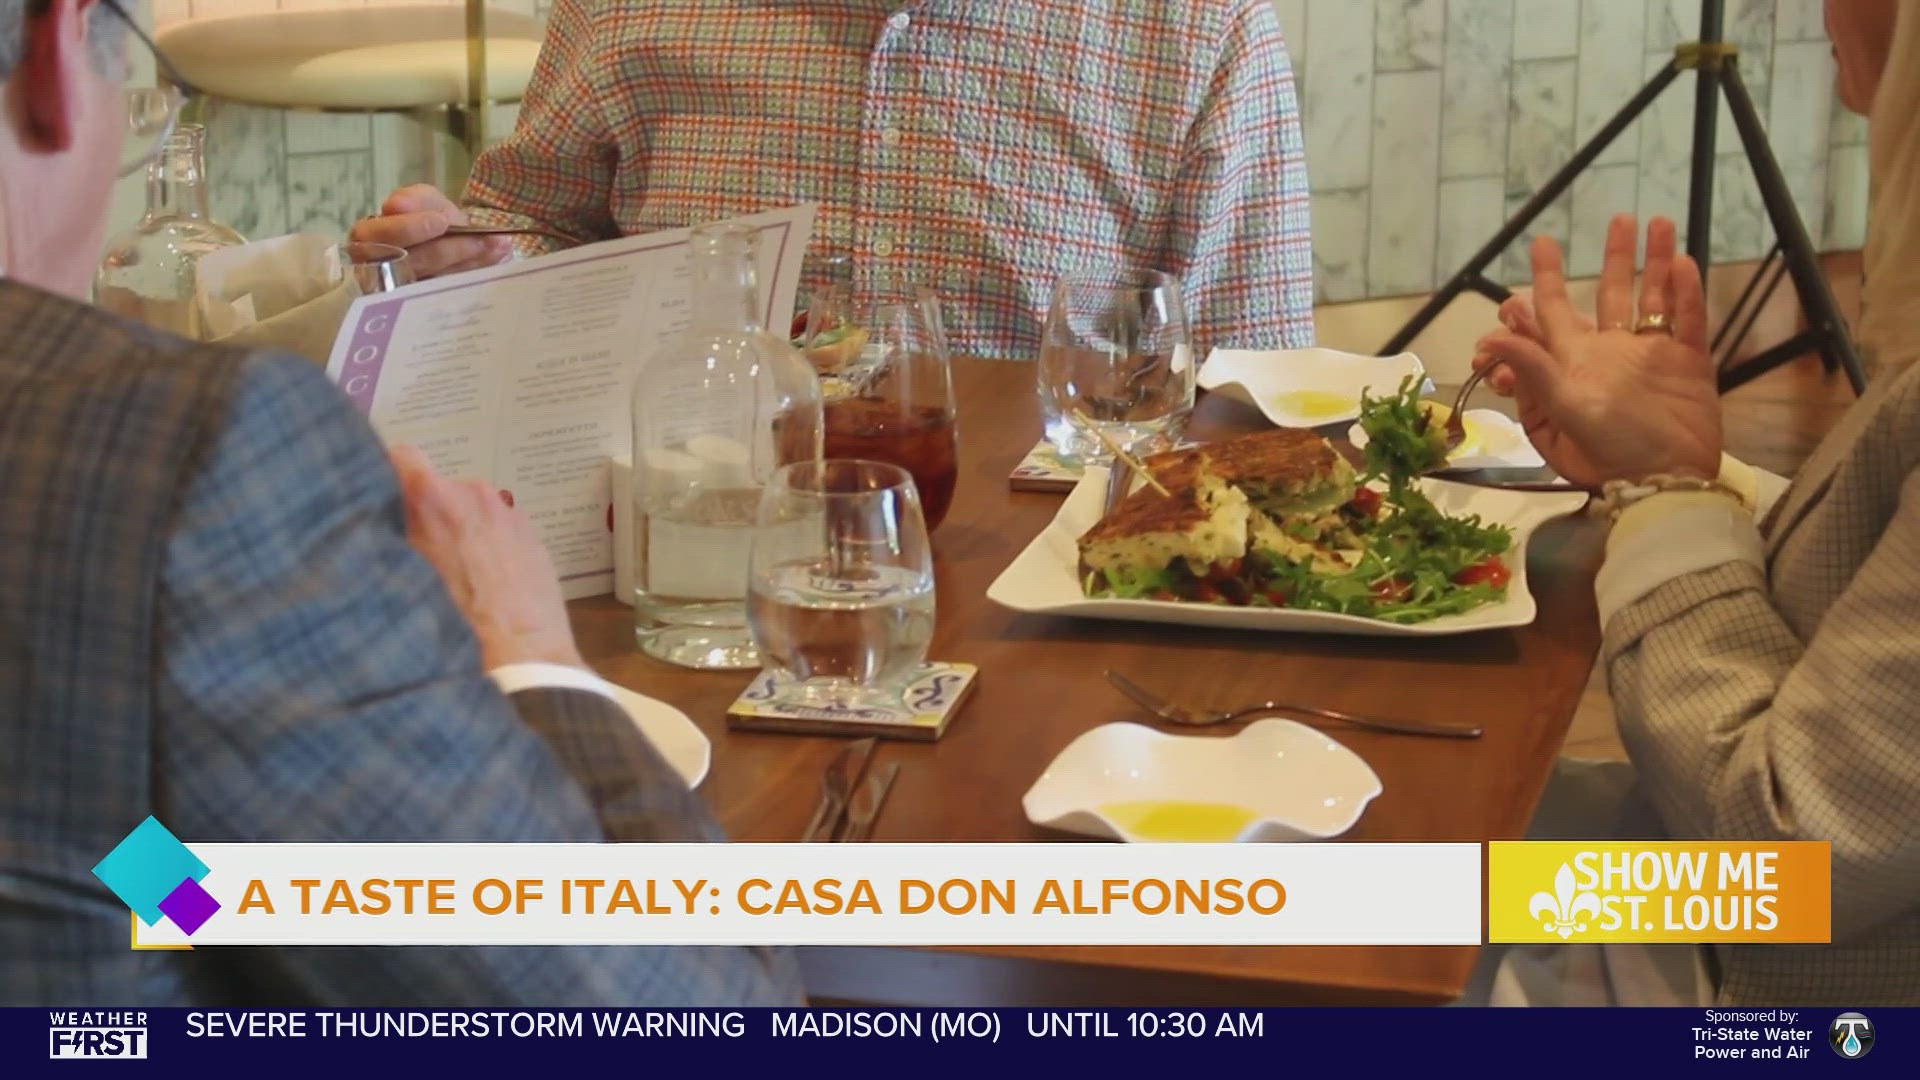 The menu at Casa Don Alfonso tell the story of traditions passed down generations in the family homes of Southern Italy.